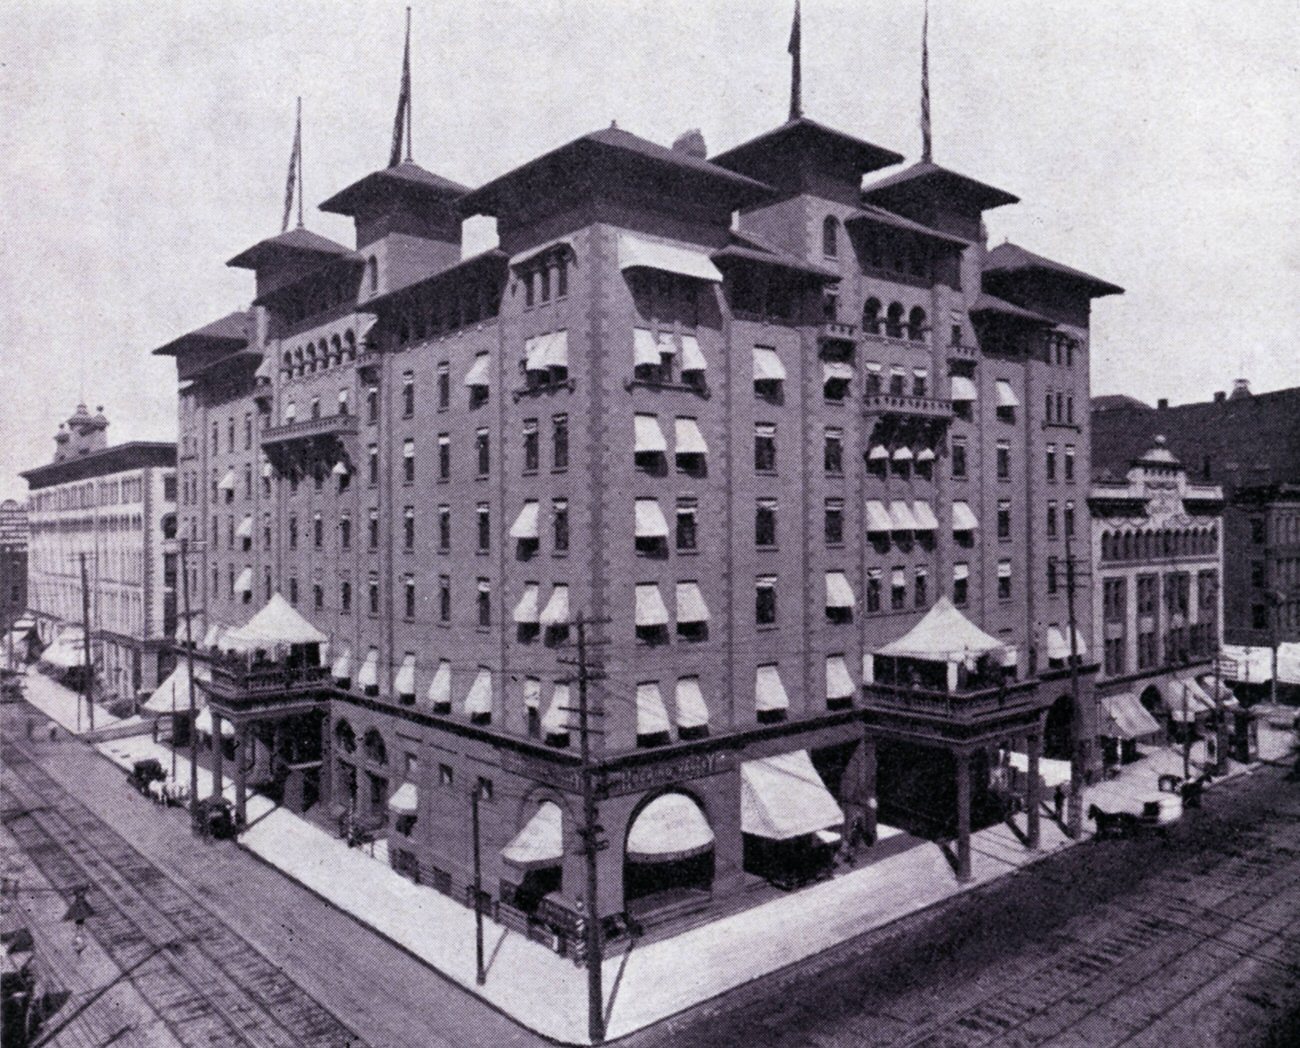 Chittenden Hotel at North High and West Spring streets, opened in 1895, closed March 15, 1972, razed February 1973, 1900.